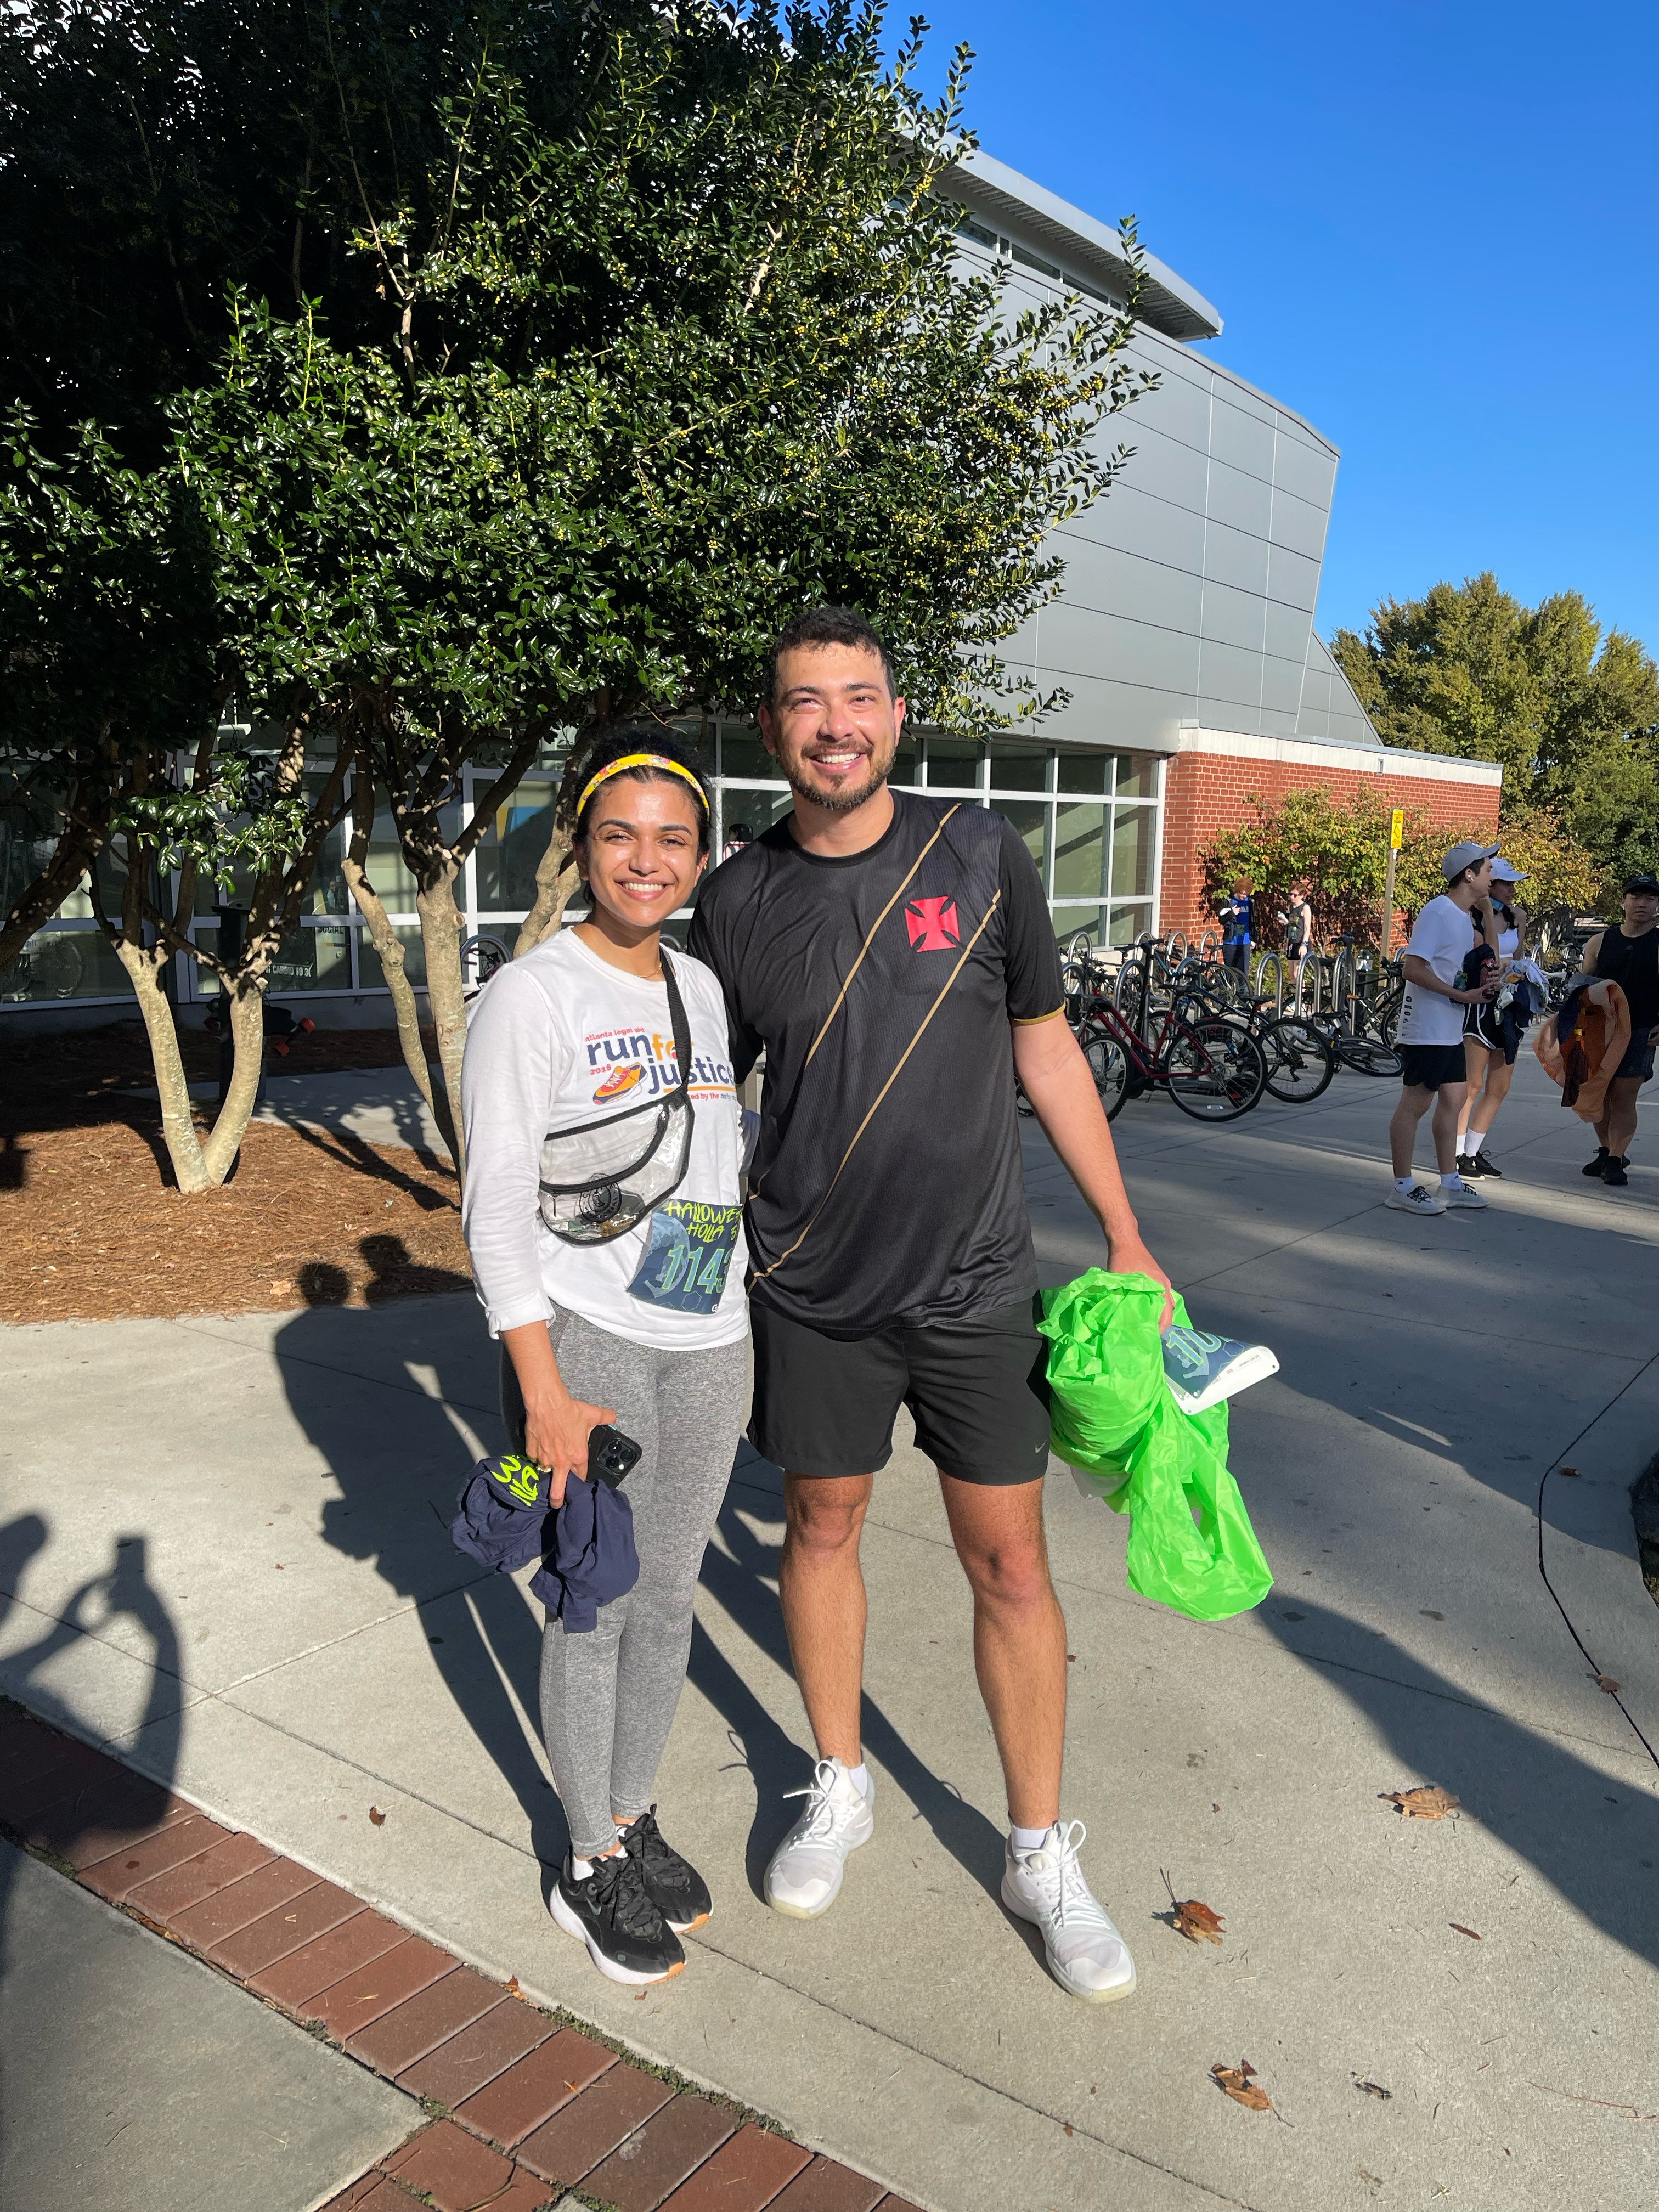 Two students pose together for a photo after running a 5k